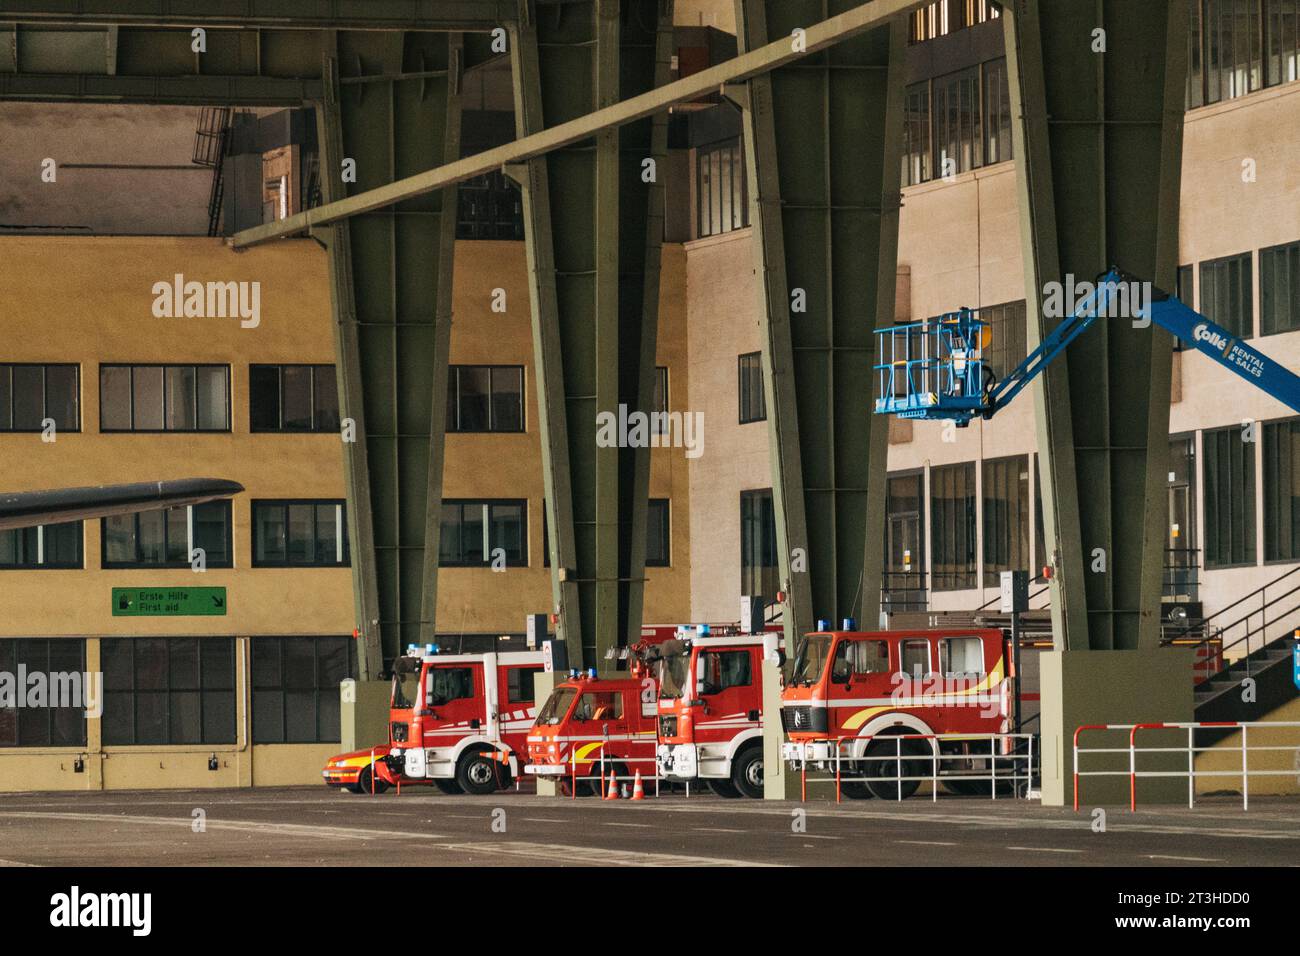 Emergency vehicles stationed at Tempelhof Airport, Berlin, Germany. The airport closed in 2008, but the fire department maintains a presence Stock Photo